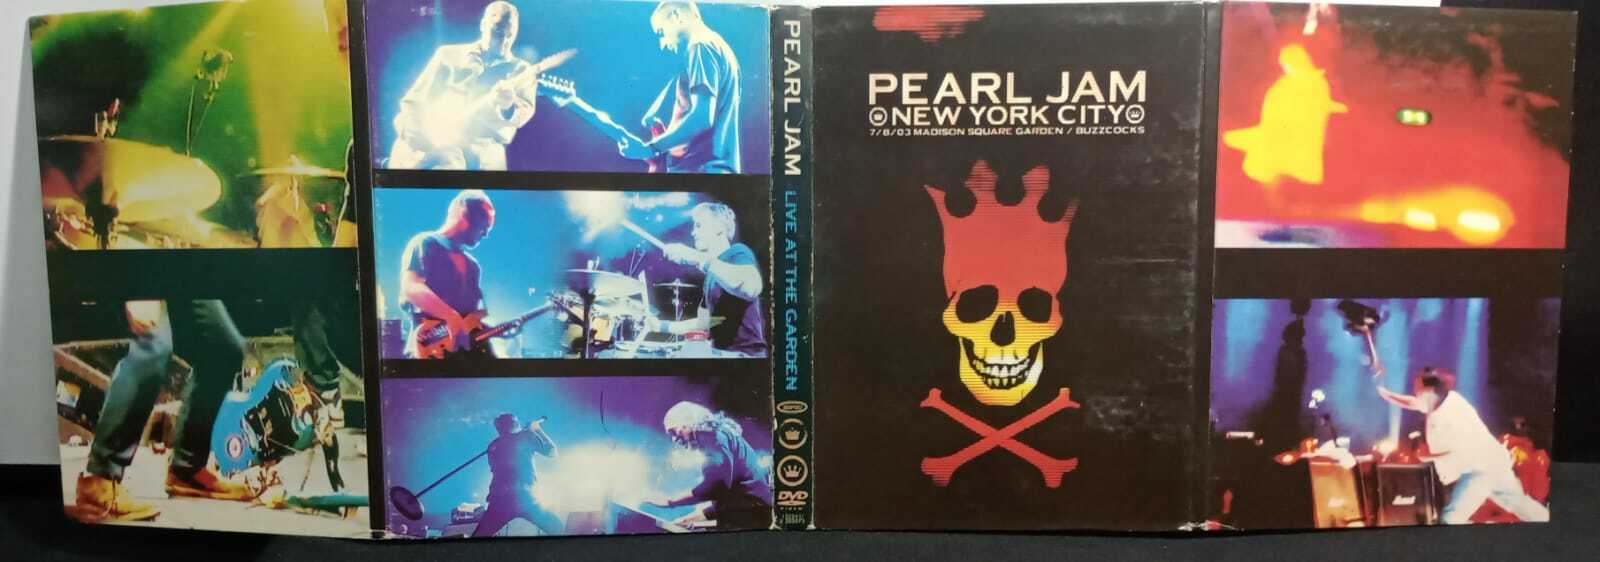 DVD - Pearl Jam - Live at the Garden (Duplo)